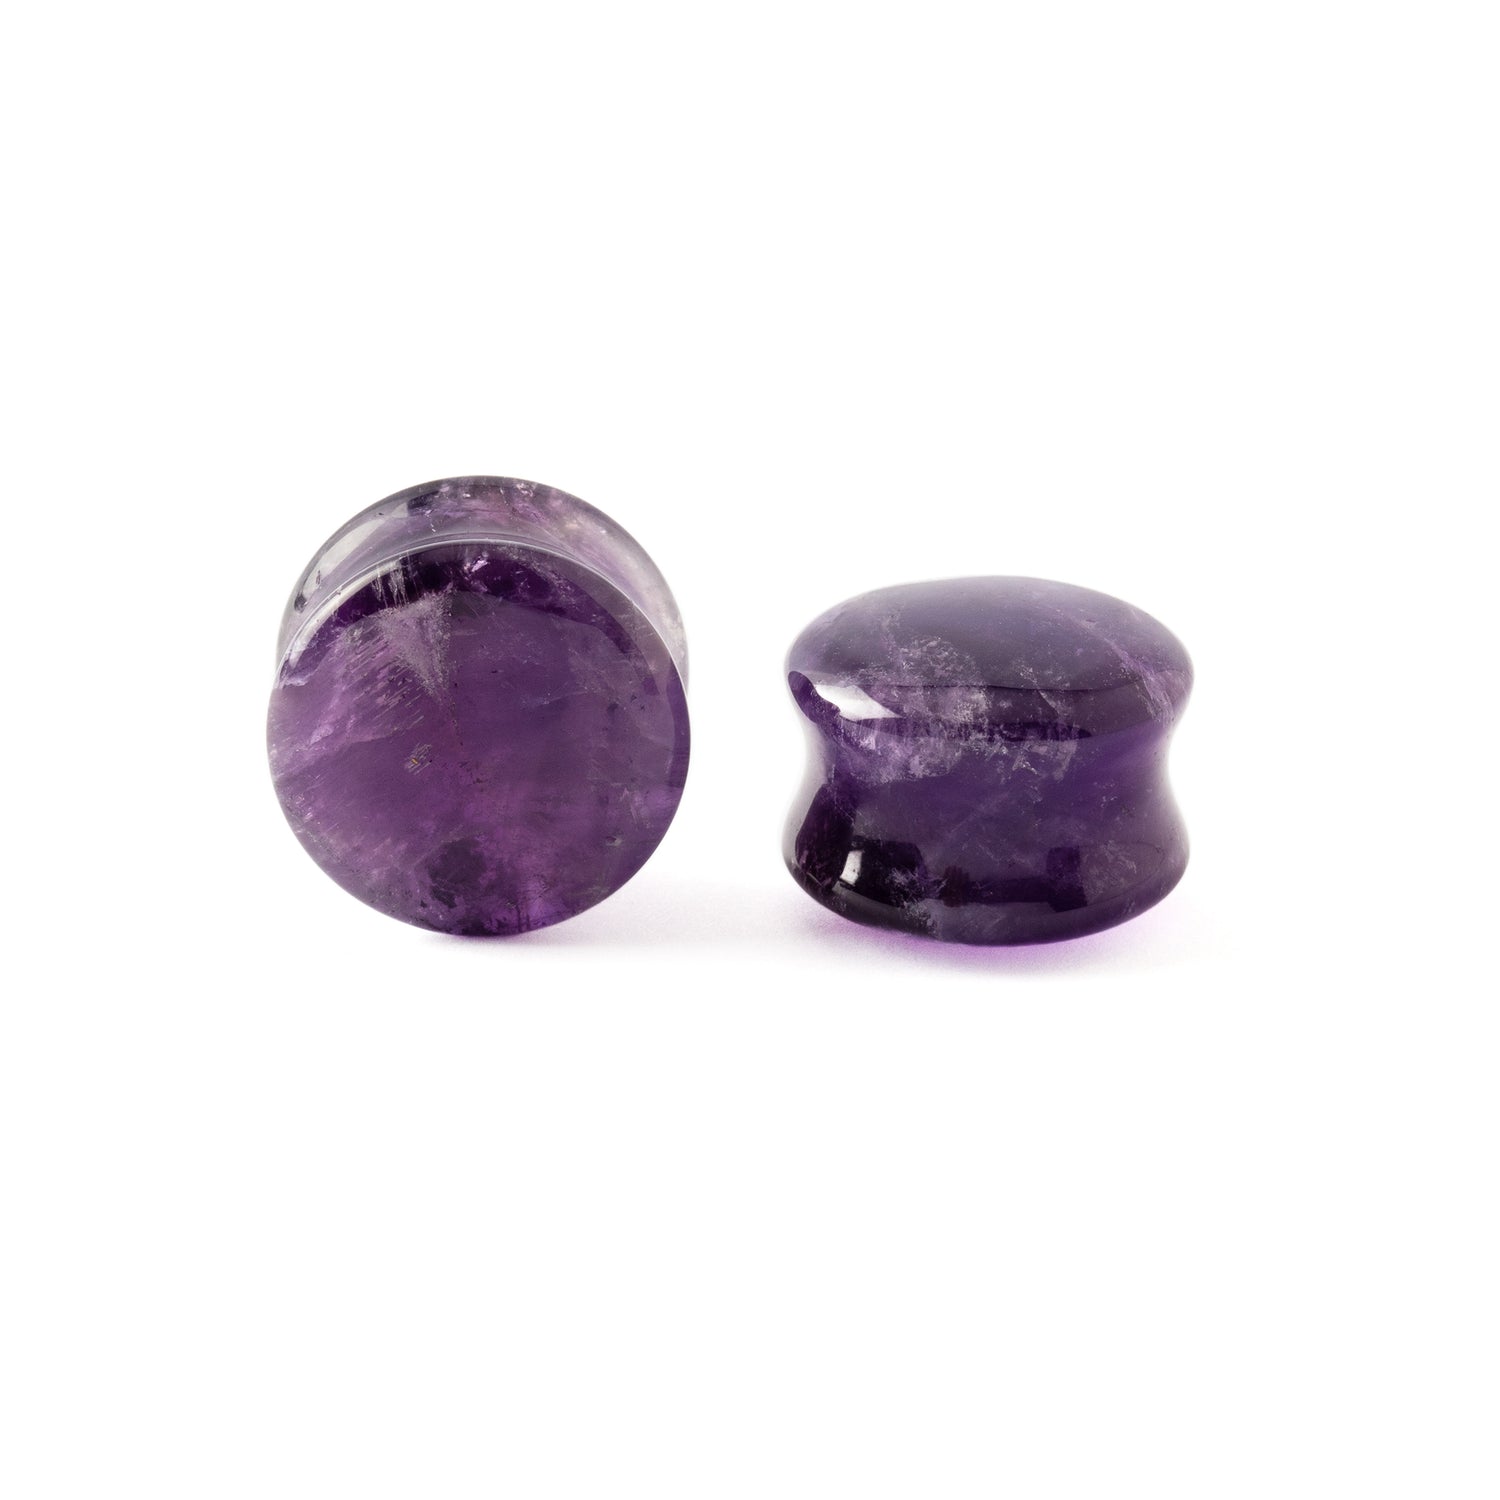 Amethyst Plug front and side view